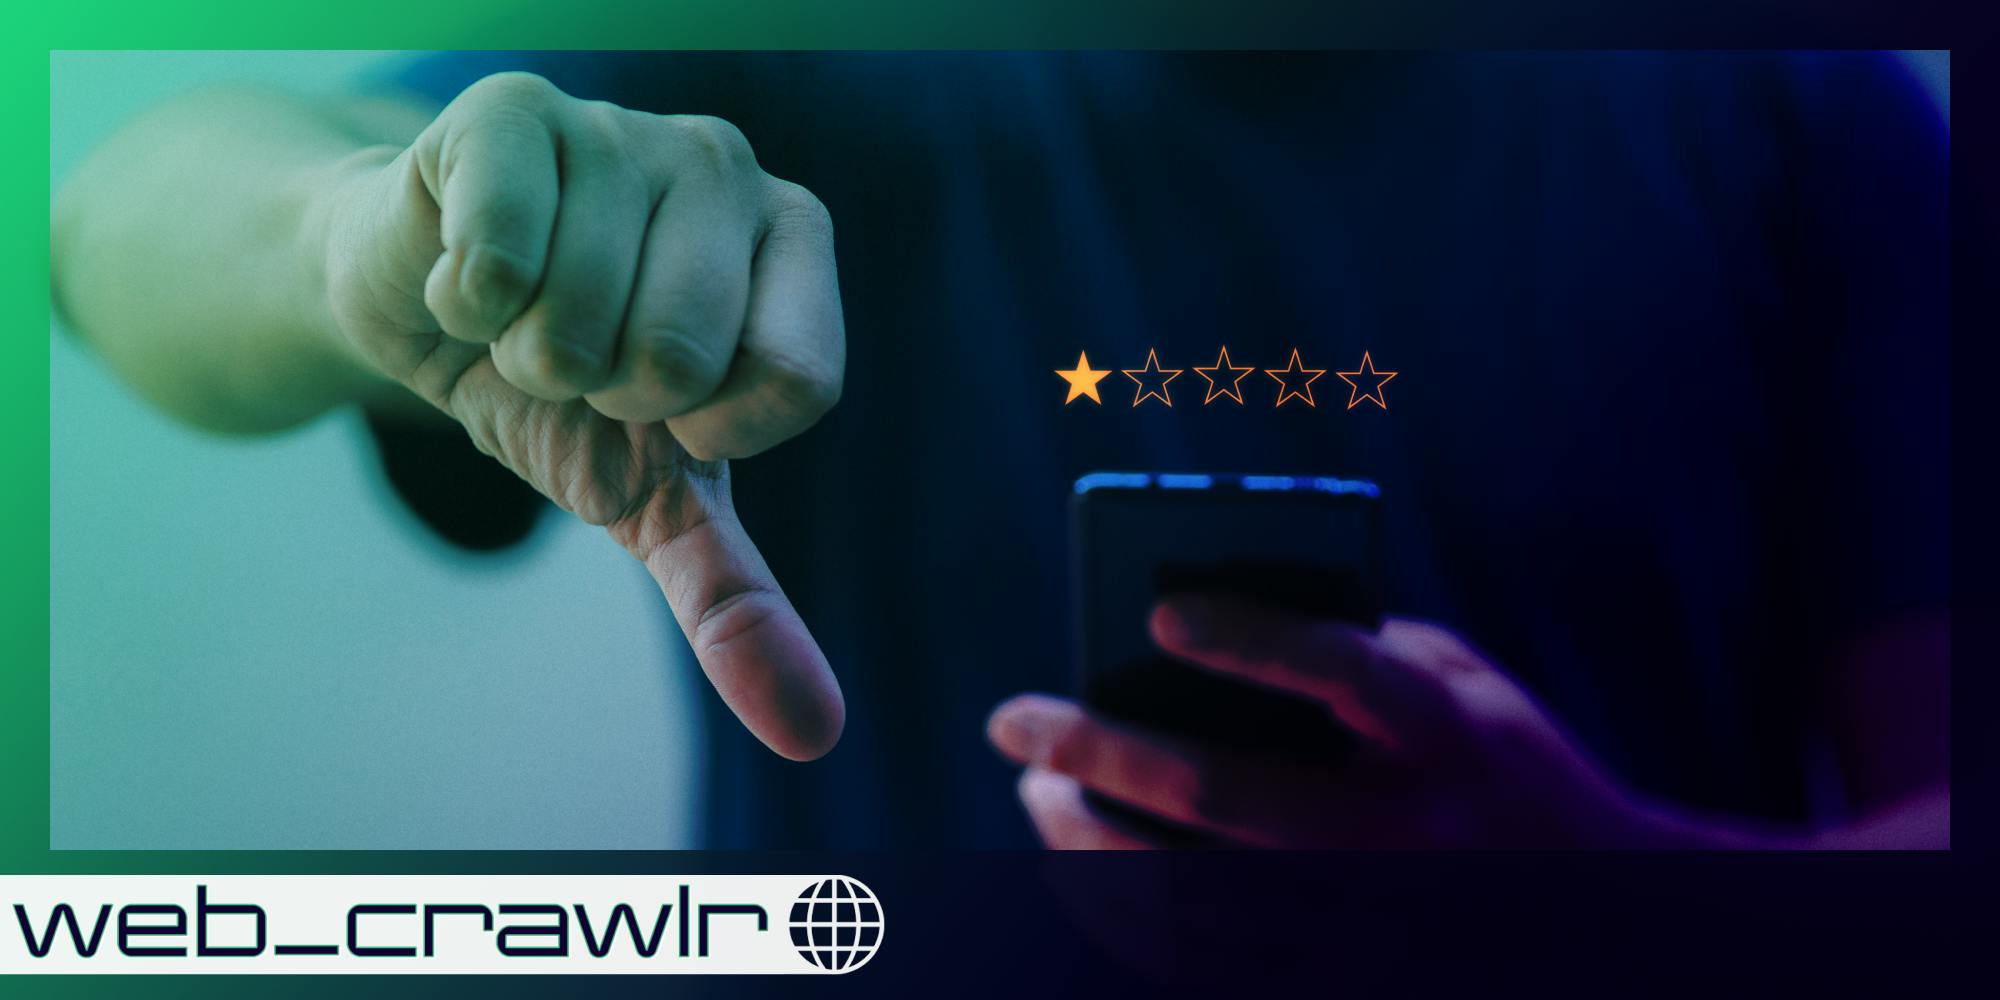 A person doing a thumb down and holding a phone with a one star review above it. The Daily Dot newsletter web_crawlr logo is in the bottom left corner.